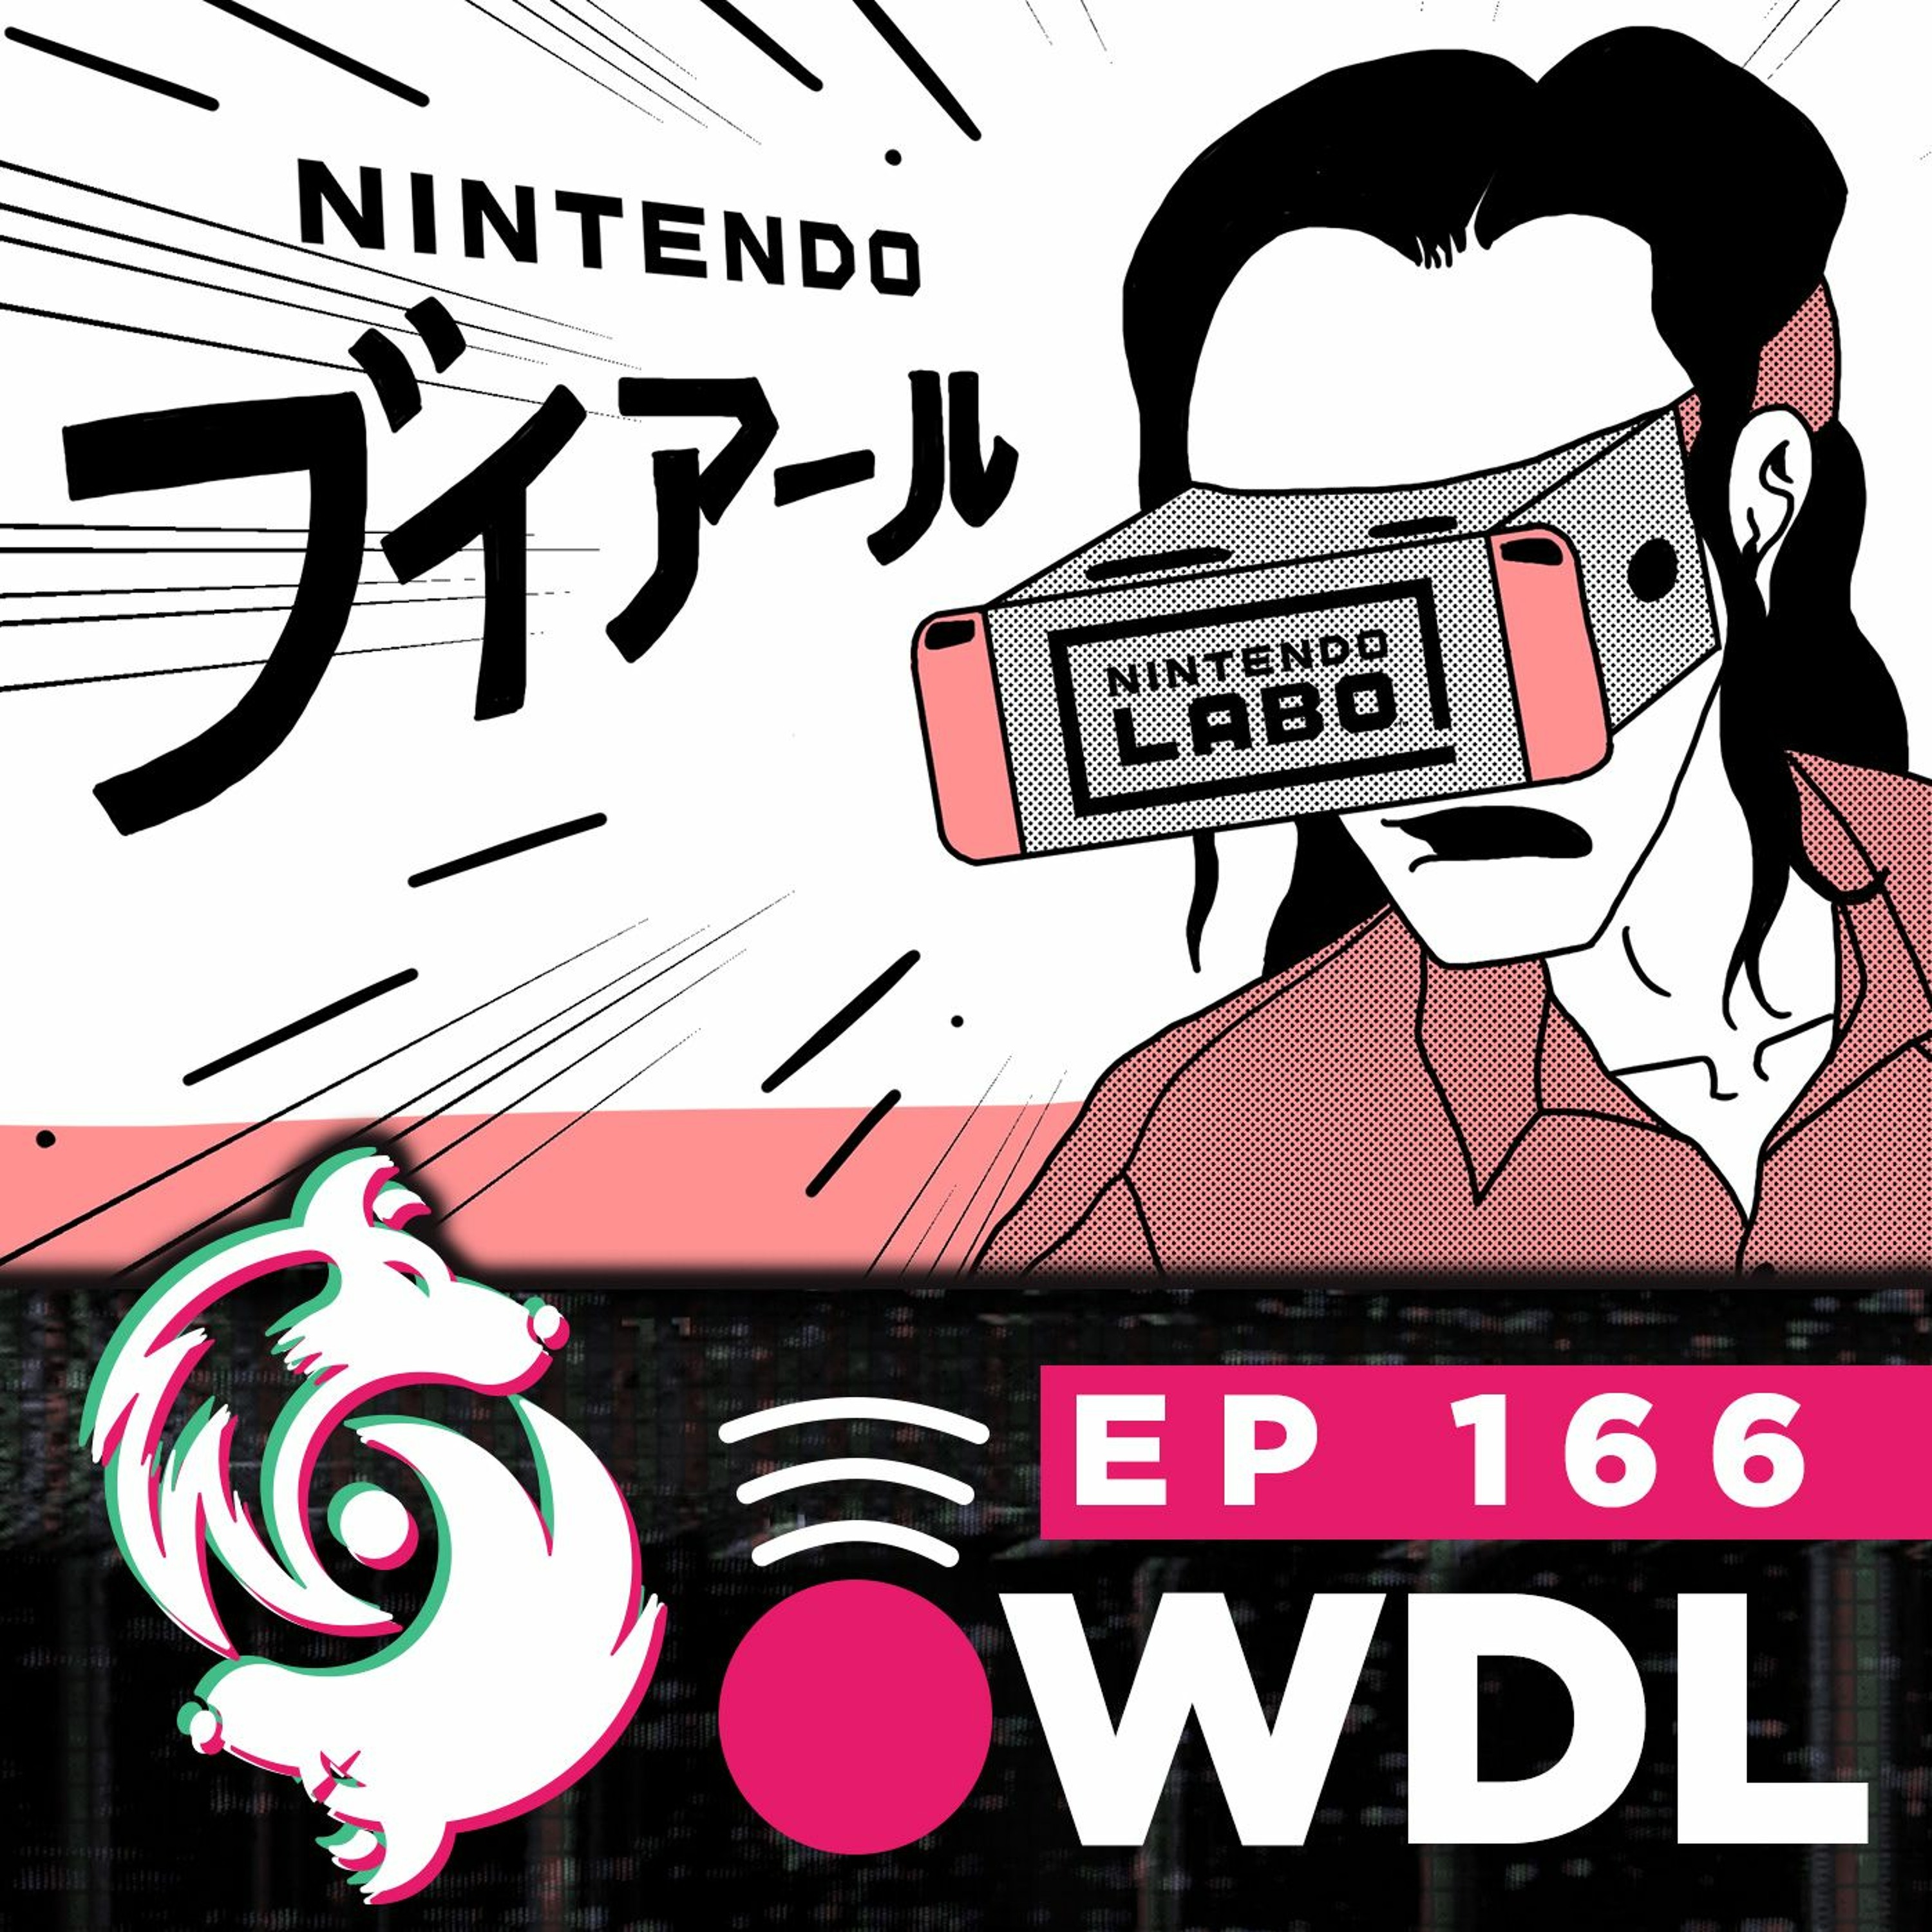 Nintendo is hopping into VR with a new Labo Kit - WDL Ep 166